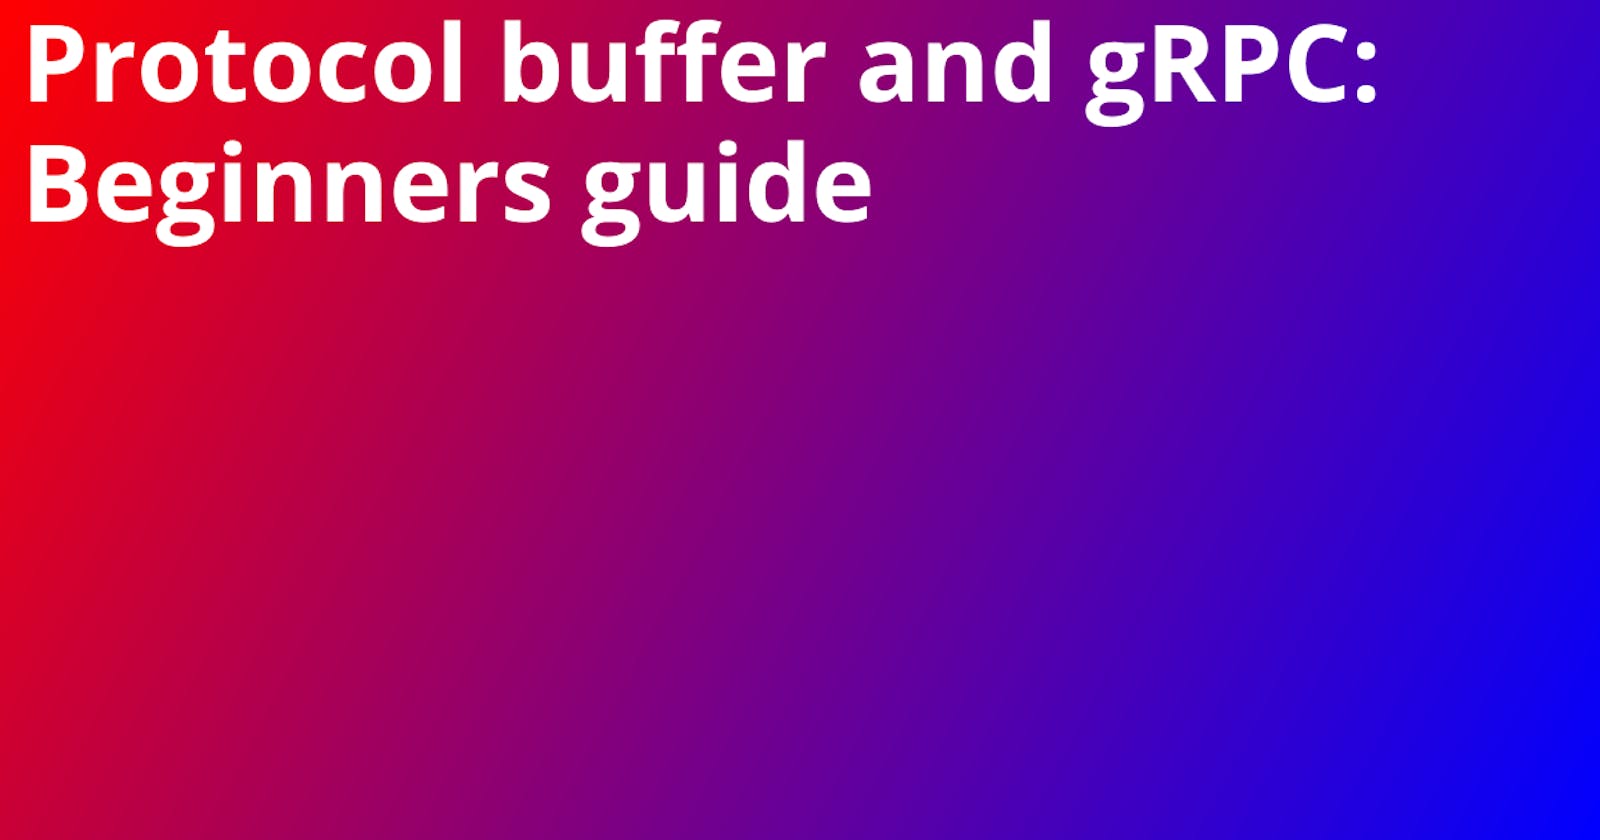 Protocol buffer and gRPC: Beginners guide